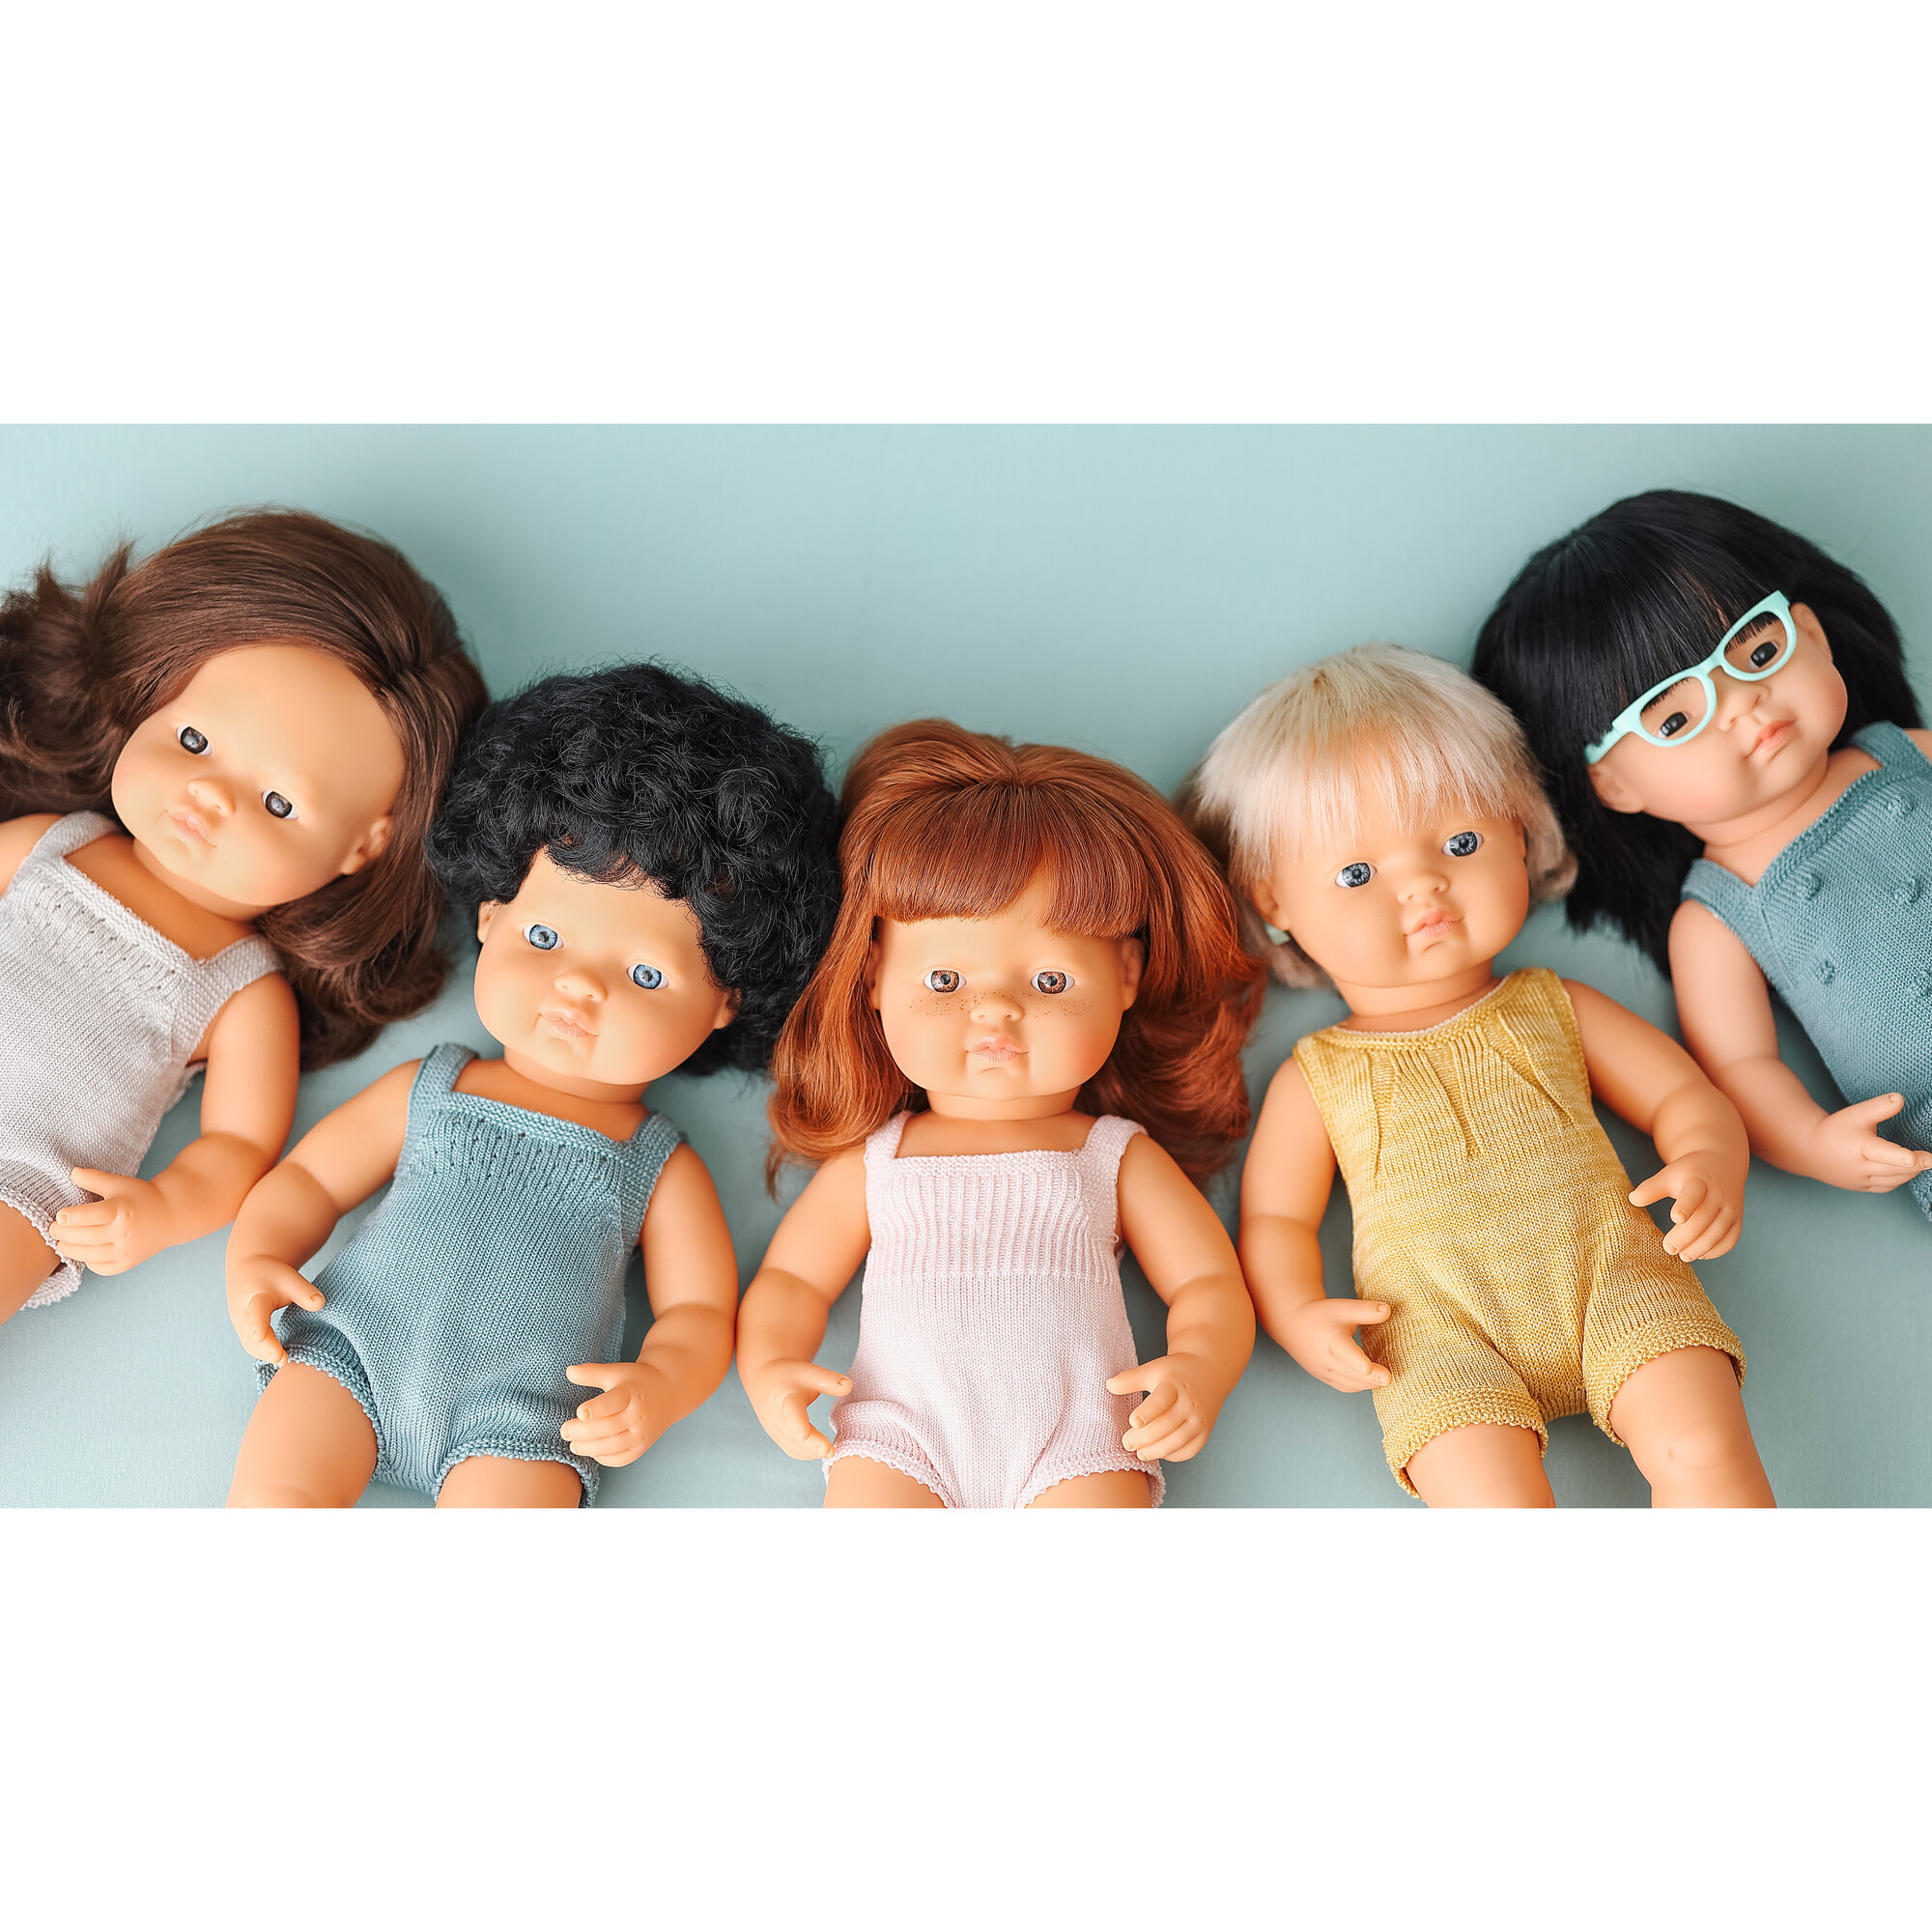 Baby Doll Caucasian Girl with Down Syndrome with Glasses 15'' by Miniland